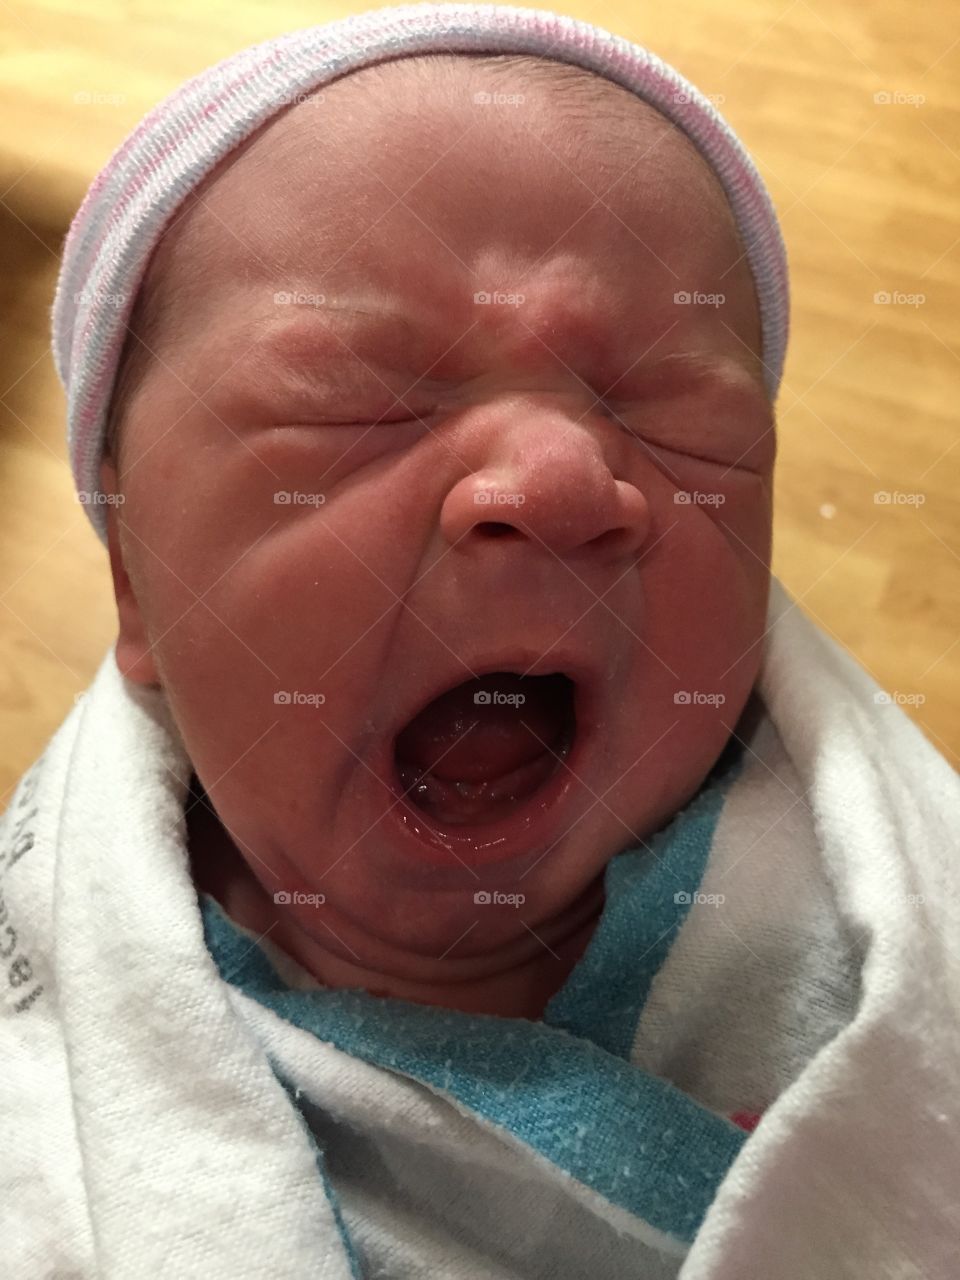 First Yawn. A baby's big yawn, after her first bit of "hard labor"